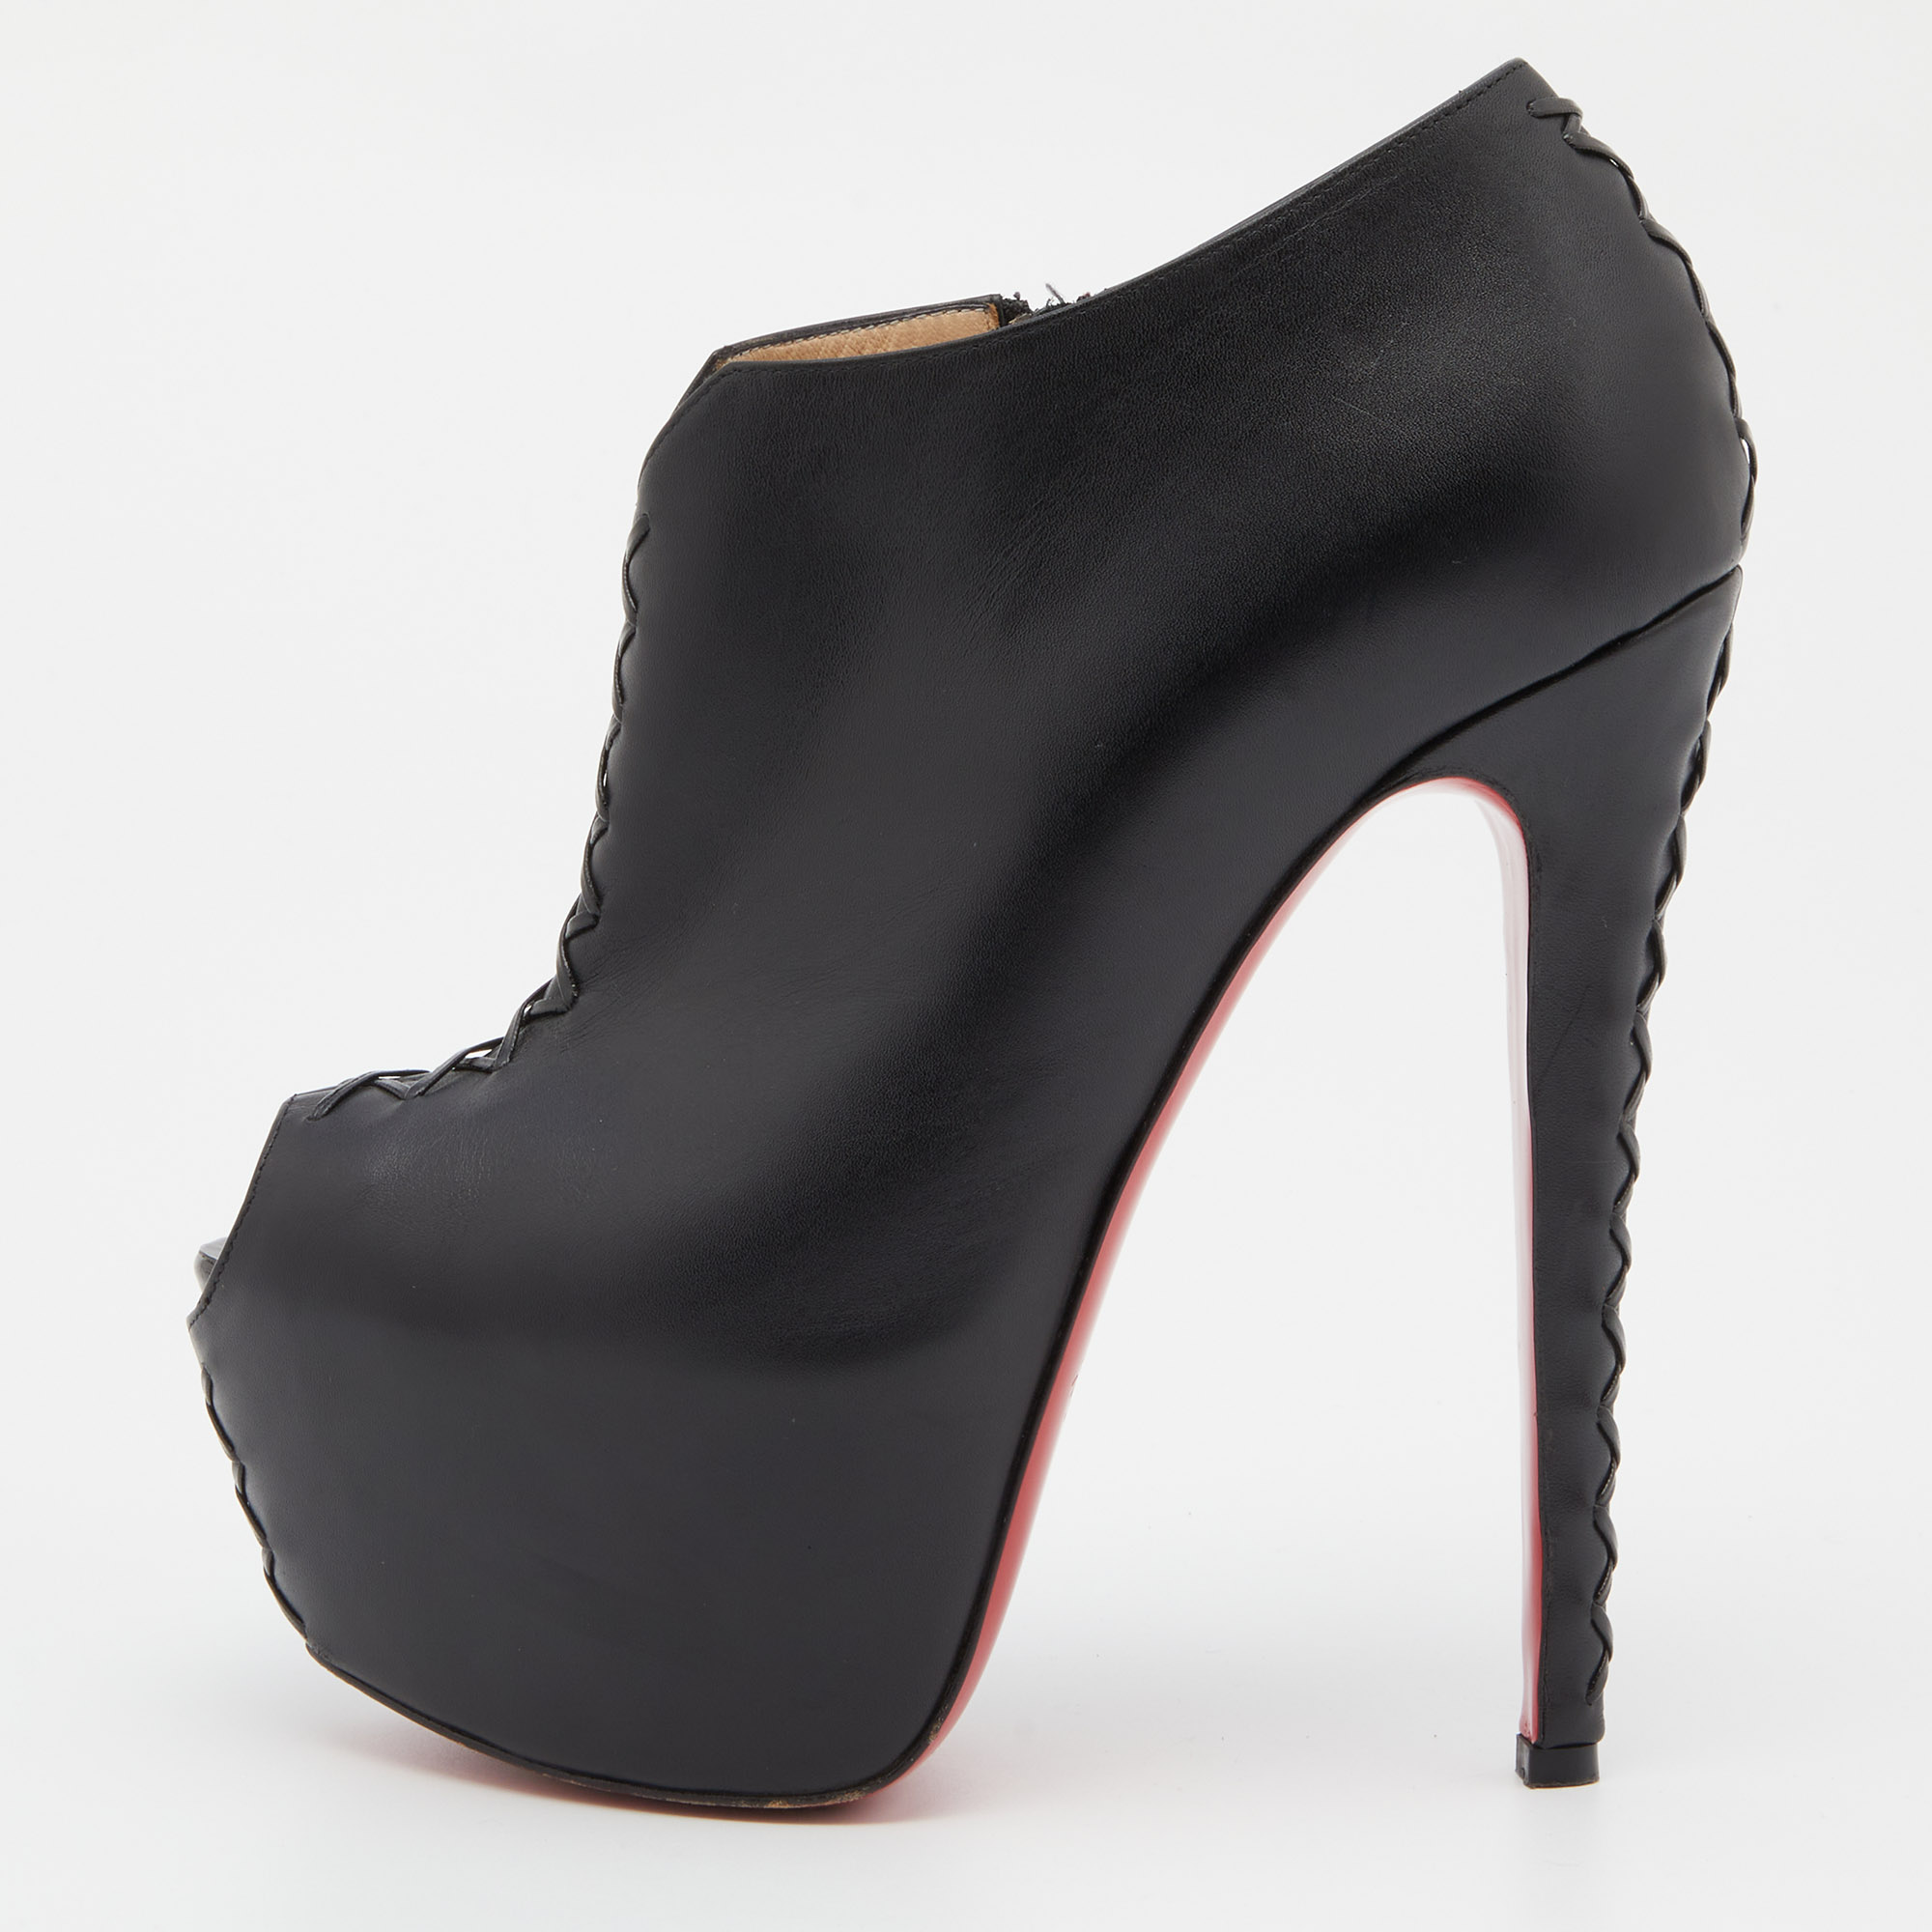 Christian Louboutin Black Pumps in Lake Worth, Texas, United States  (SalvageSale Item #7237918)